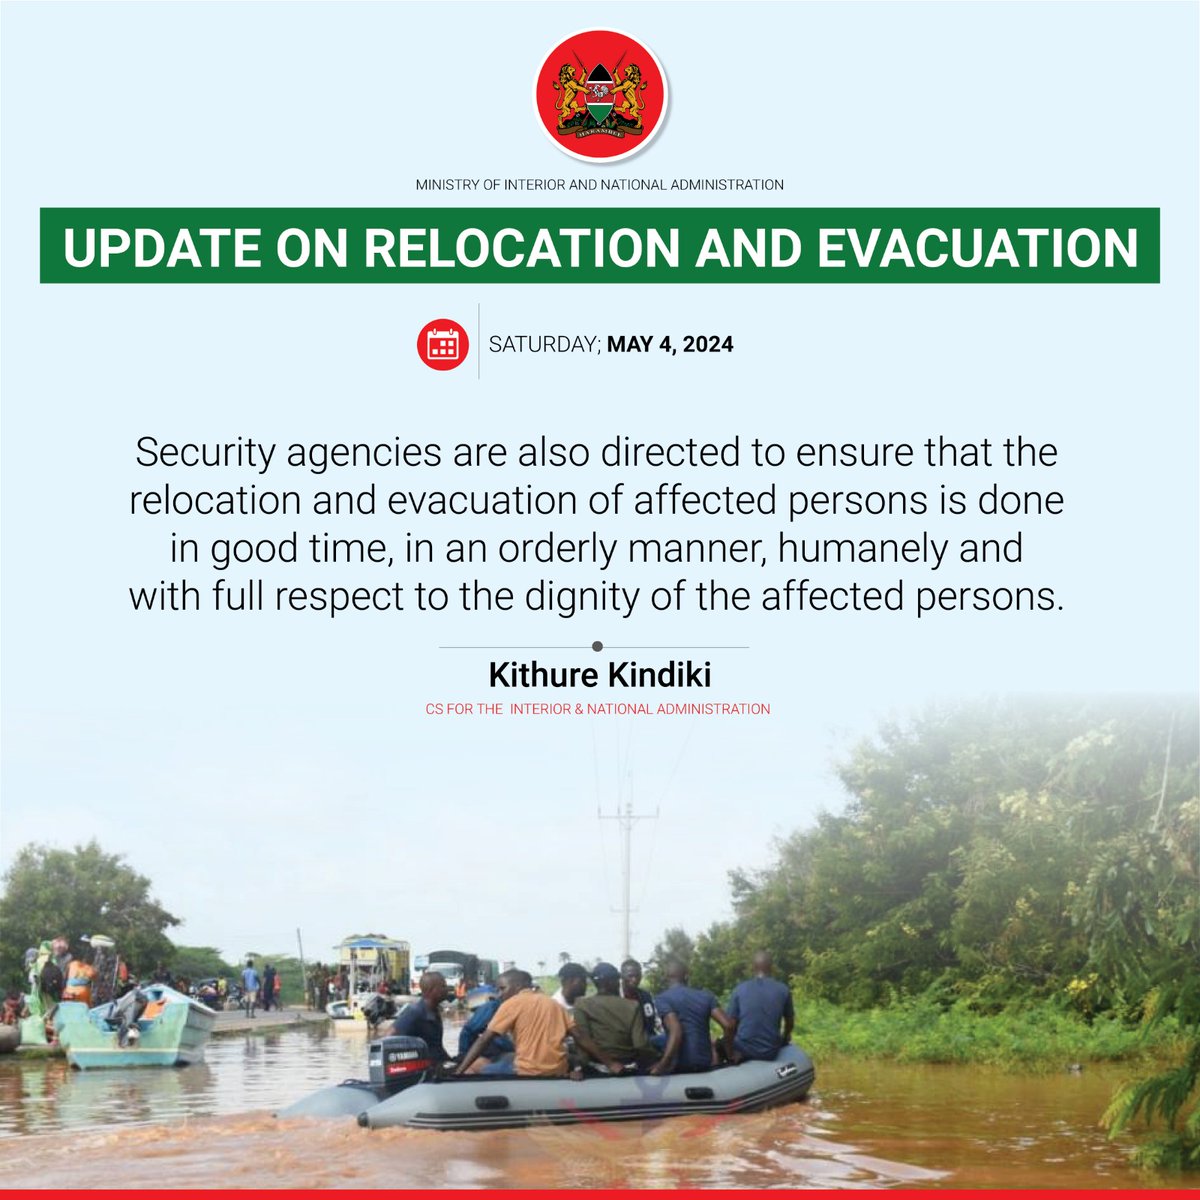 Security agencies are conducting relocations with respect and humanity, while collaboration with County Governments and stakeholders enhances flood mitigation efforts.
Interior Cabinet Secretary Kithure Kindiki 
#MitigatingFloodsEffects